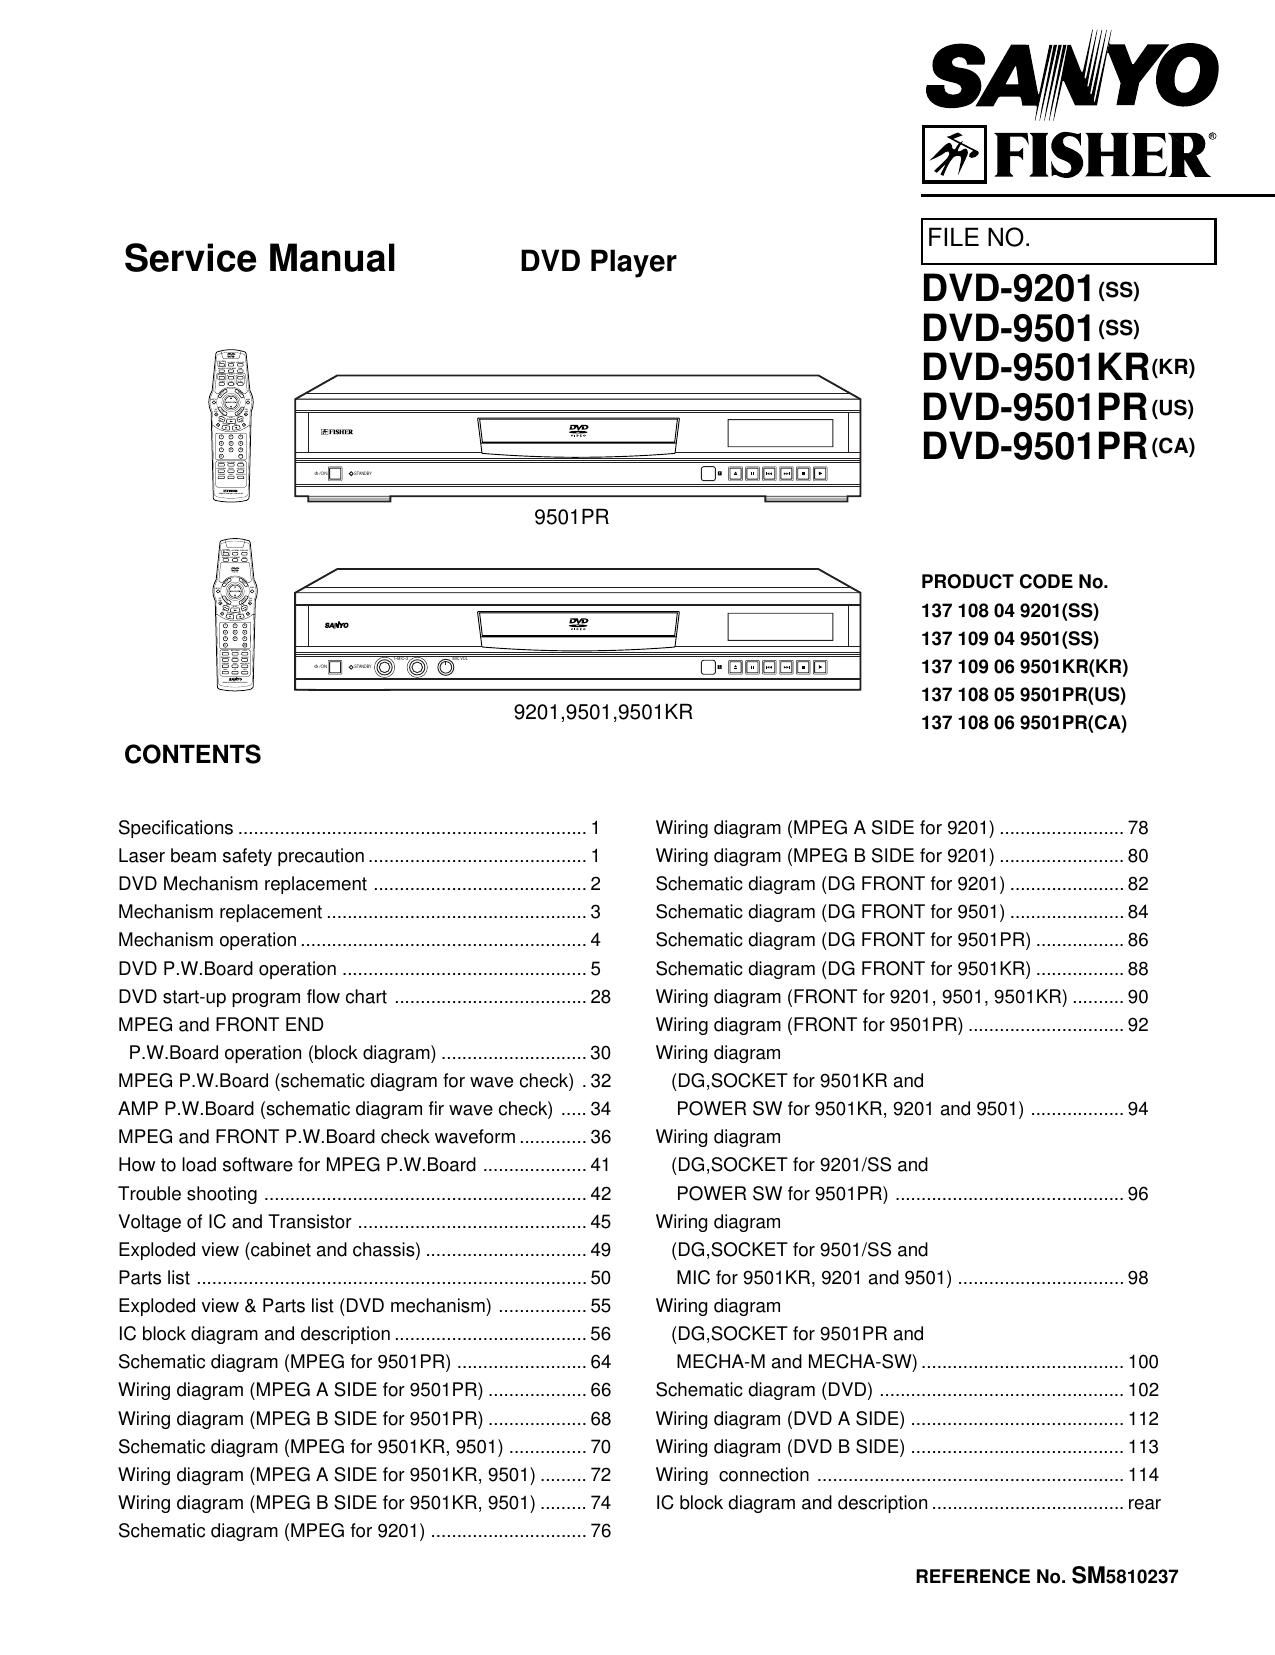 Fisher DVD 9201 Service Manual